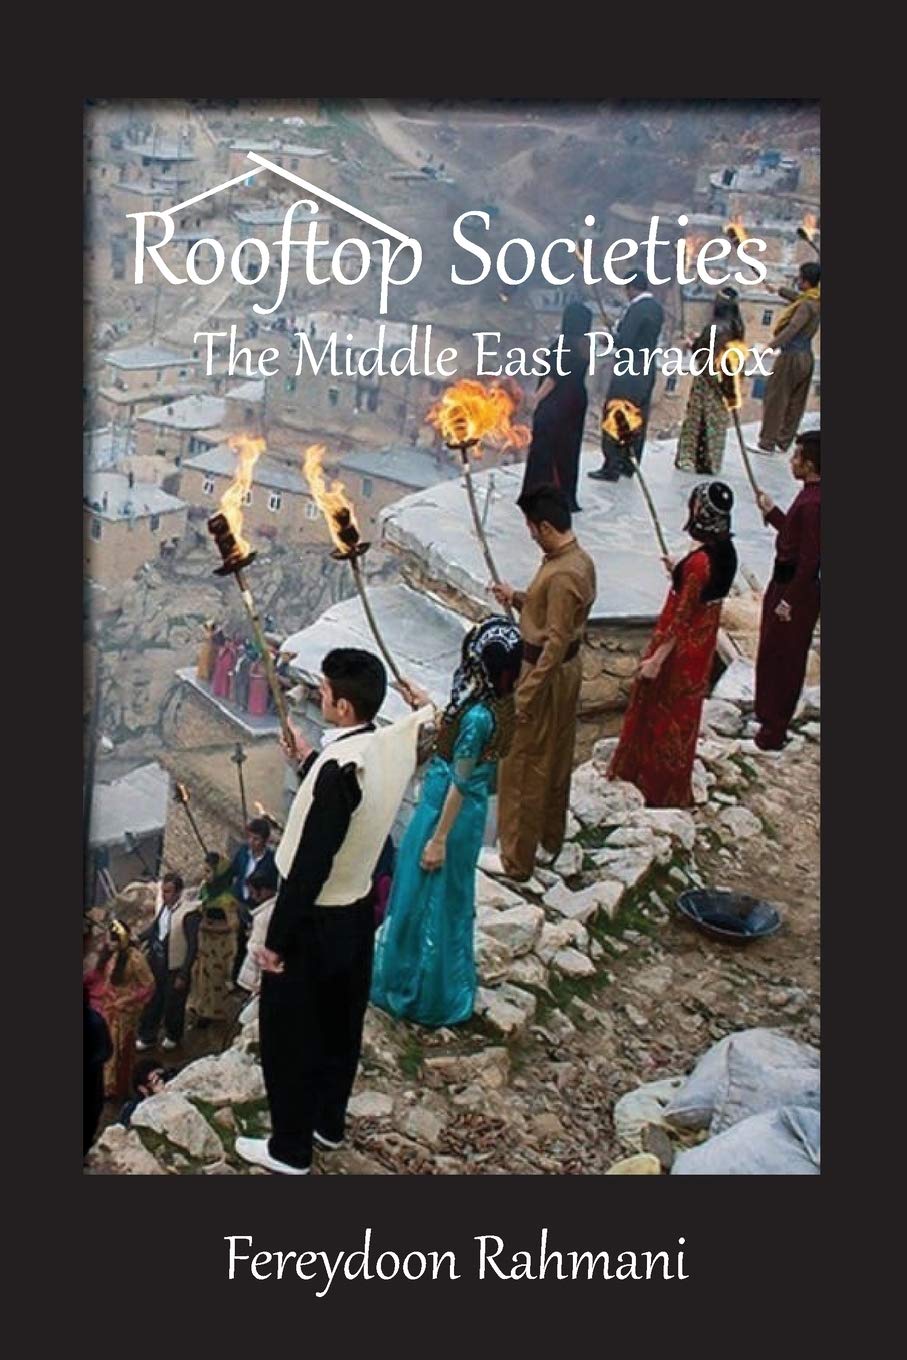 Rooftop Societies: The Middle East Paradox